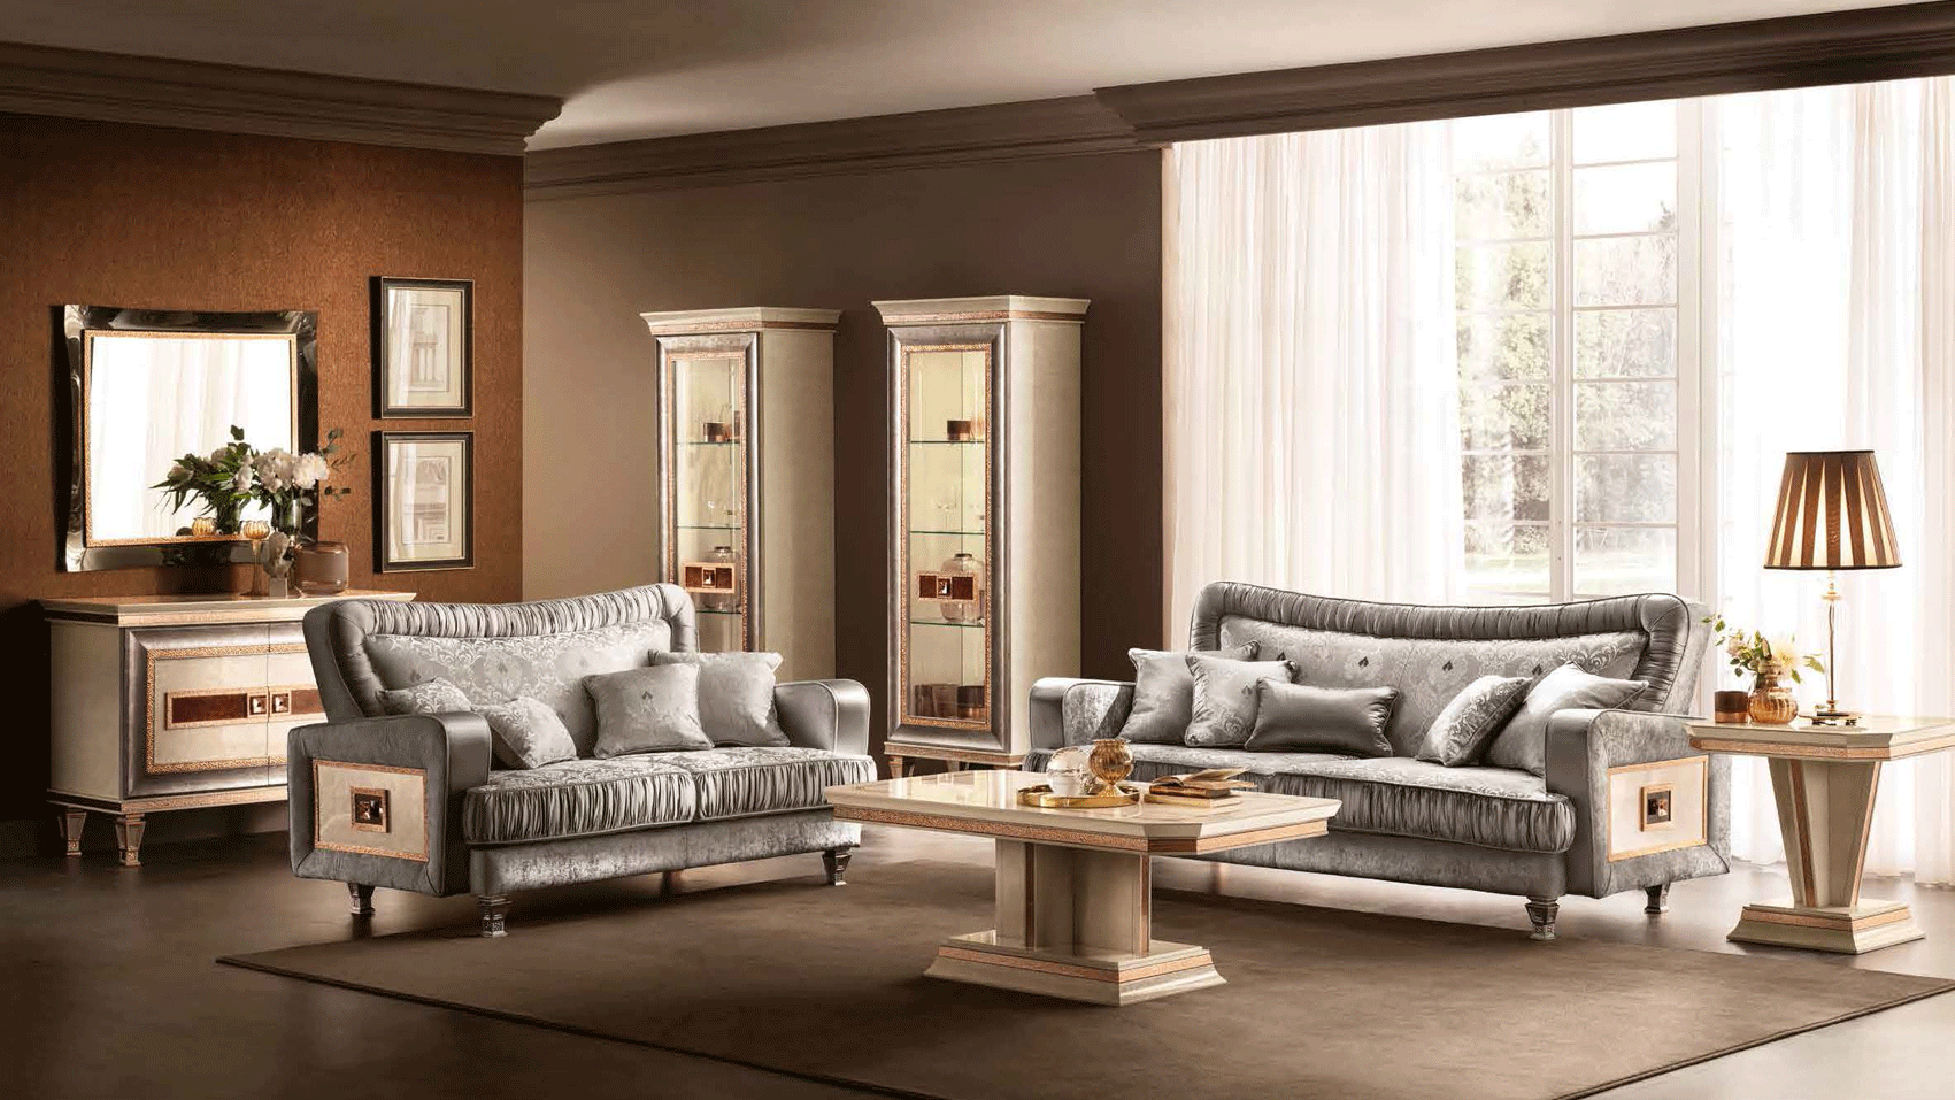 Living Room Furniture Reclining and Sliding Seats Sets Dolce Vita